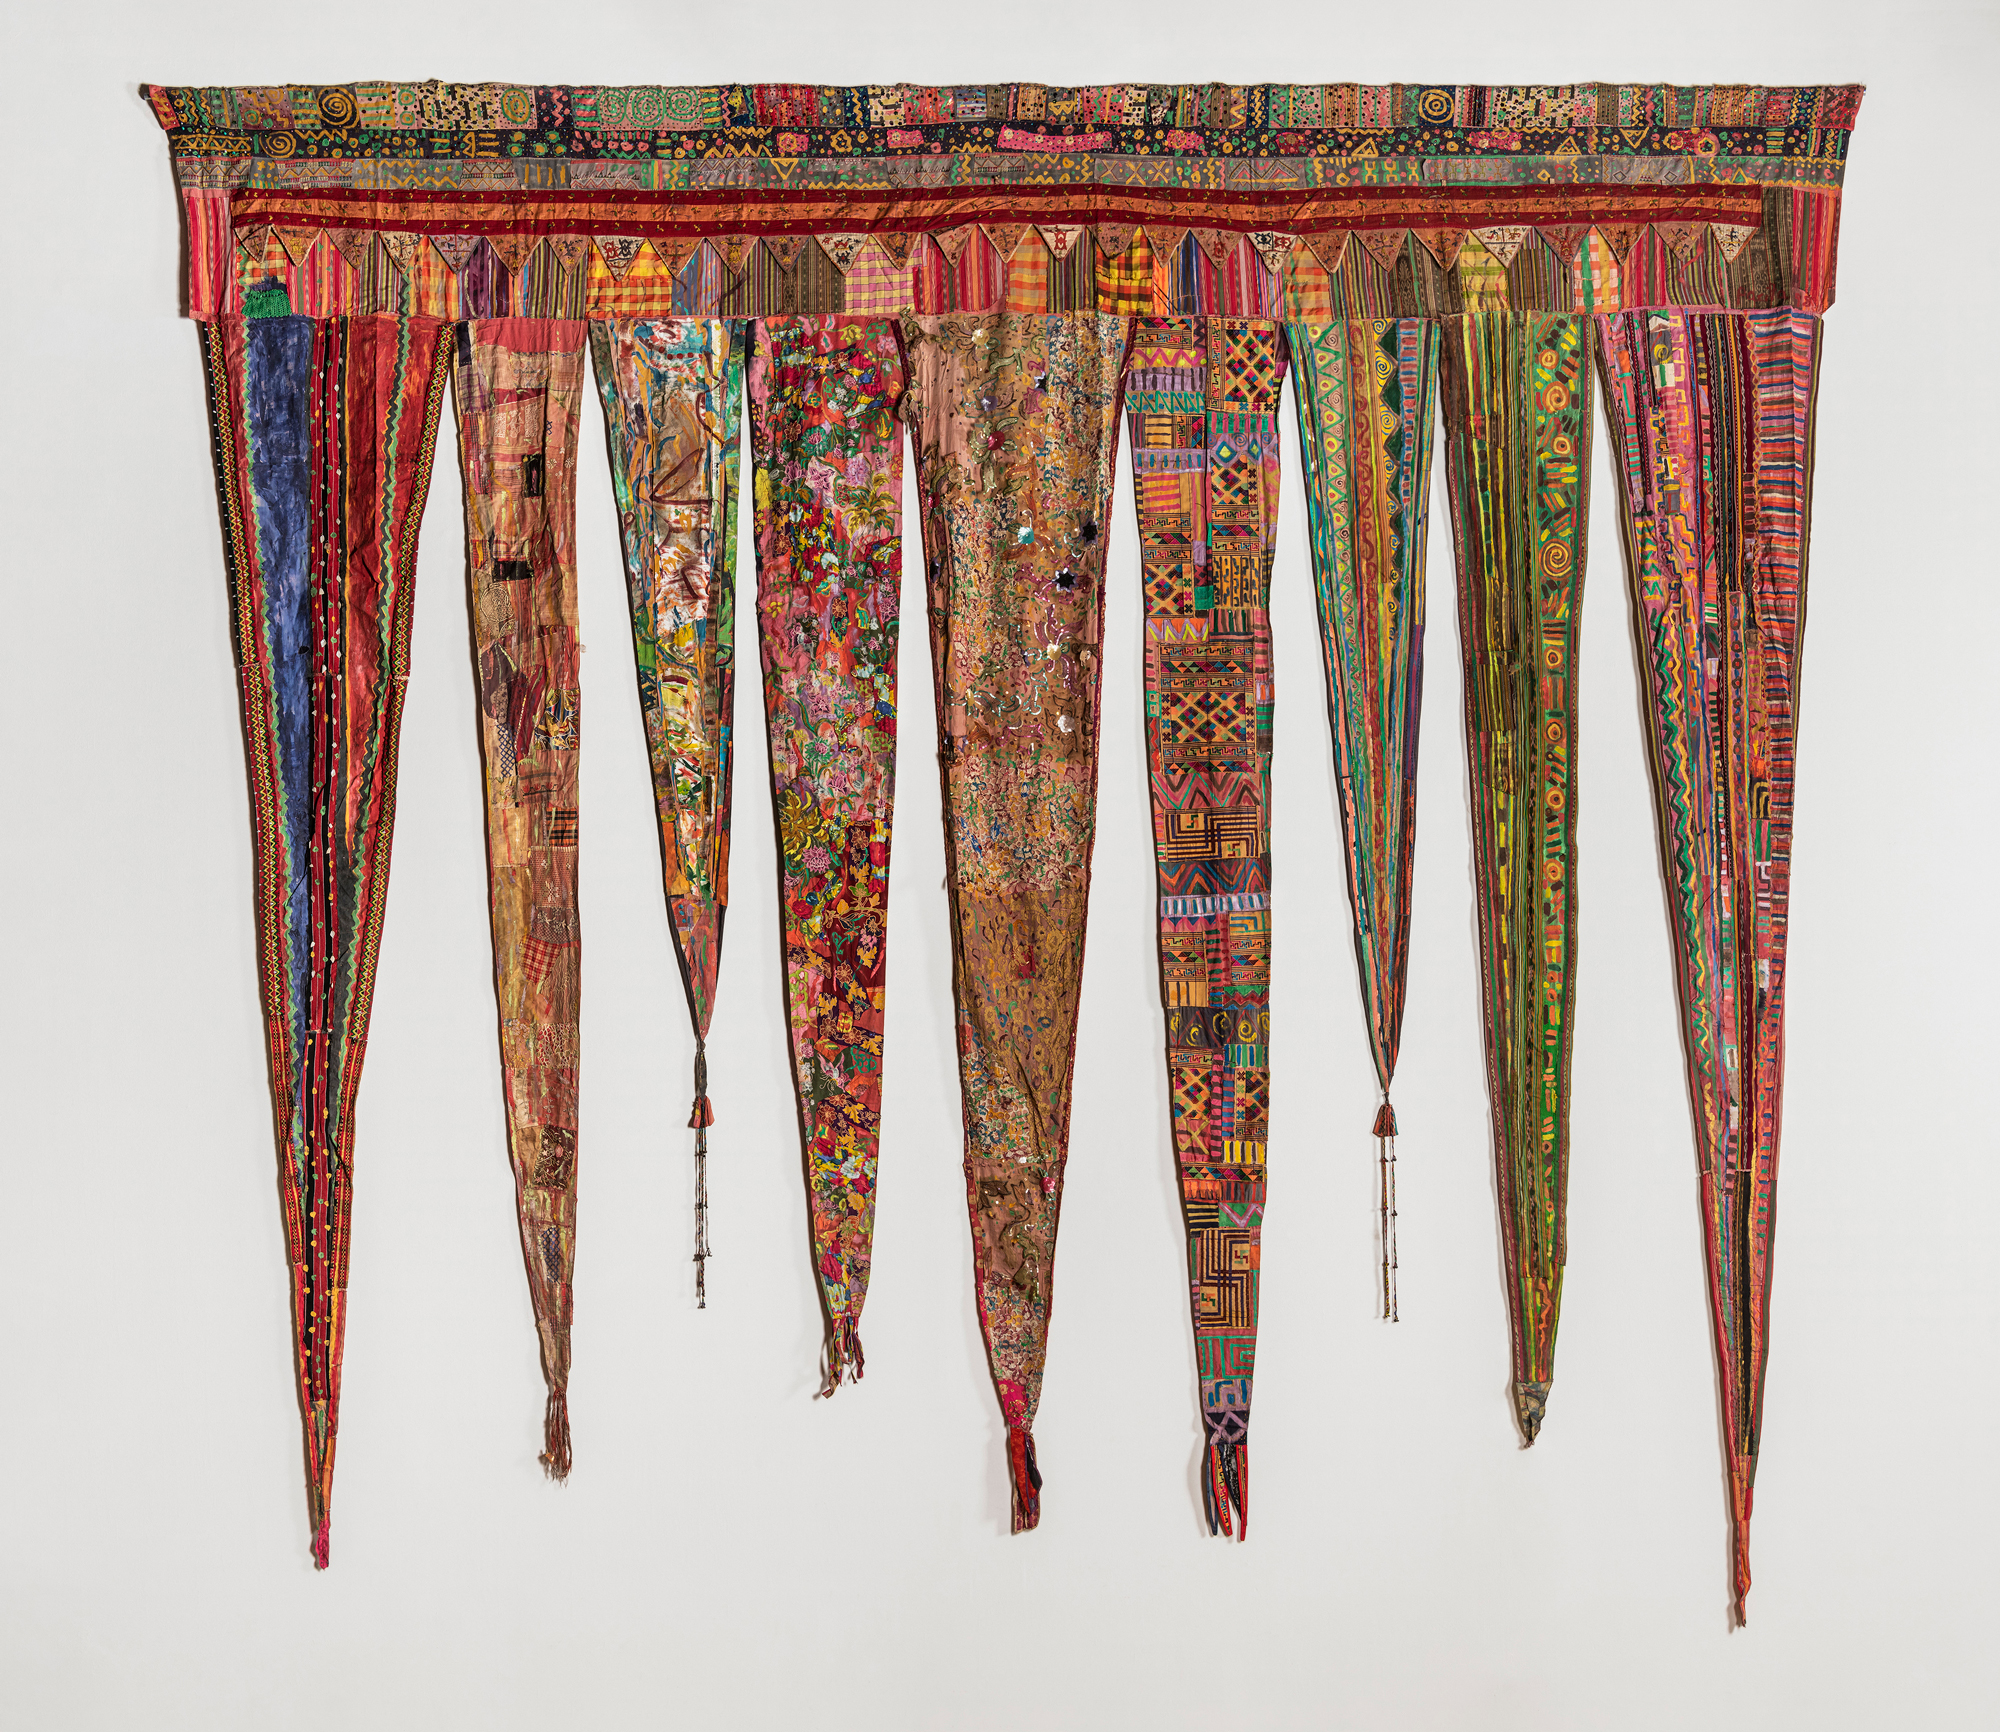 Textile piece made up of many fabrics and patterns, with nine long thin triangles descending from top band